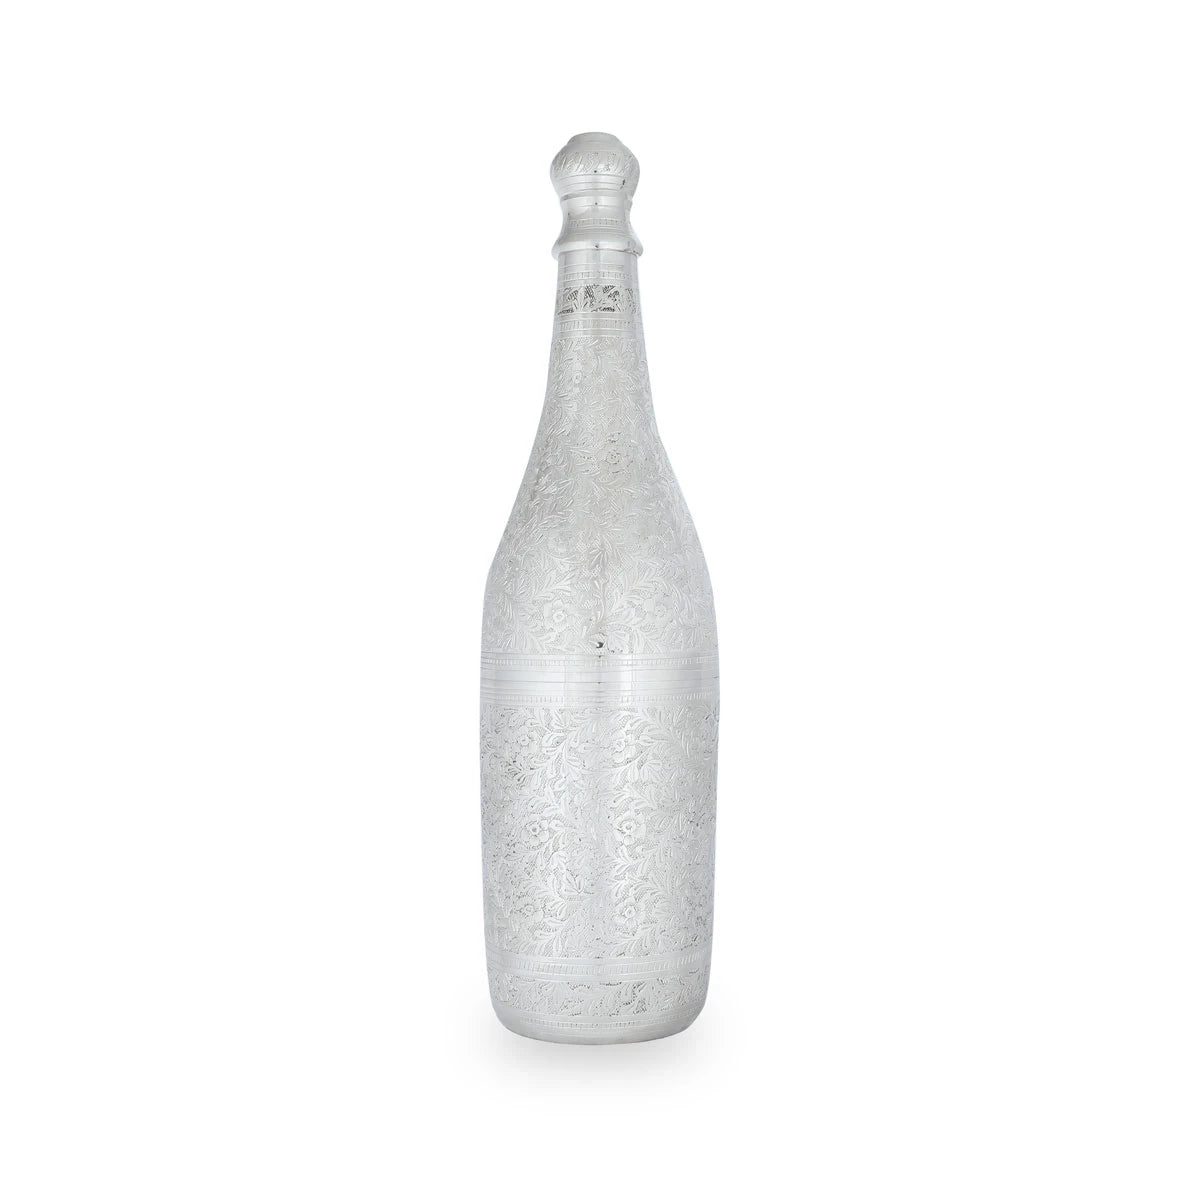 Glossy Silver Colored Hand-carved Brass Metal Bottle Decor